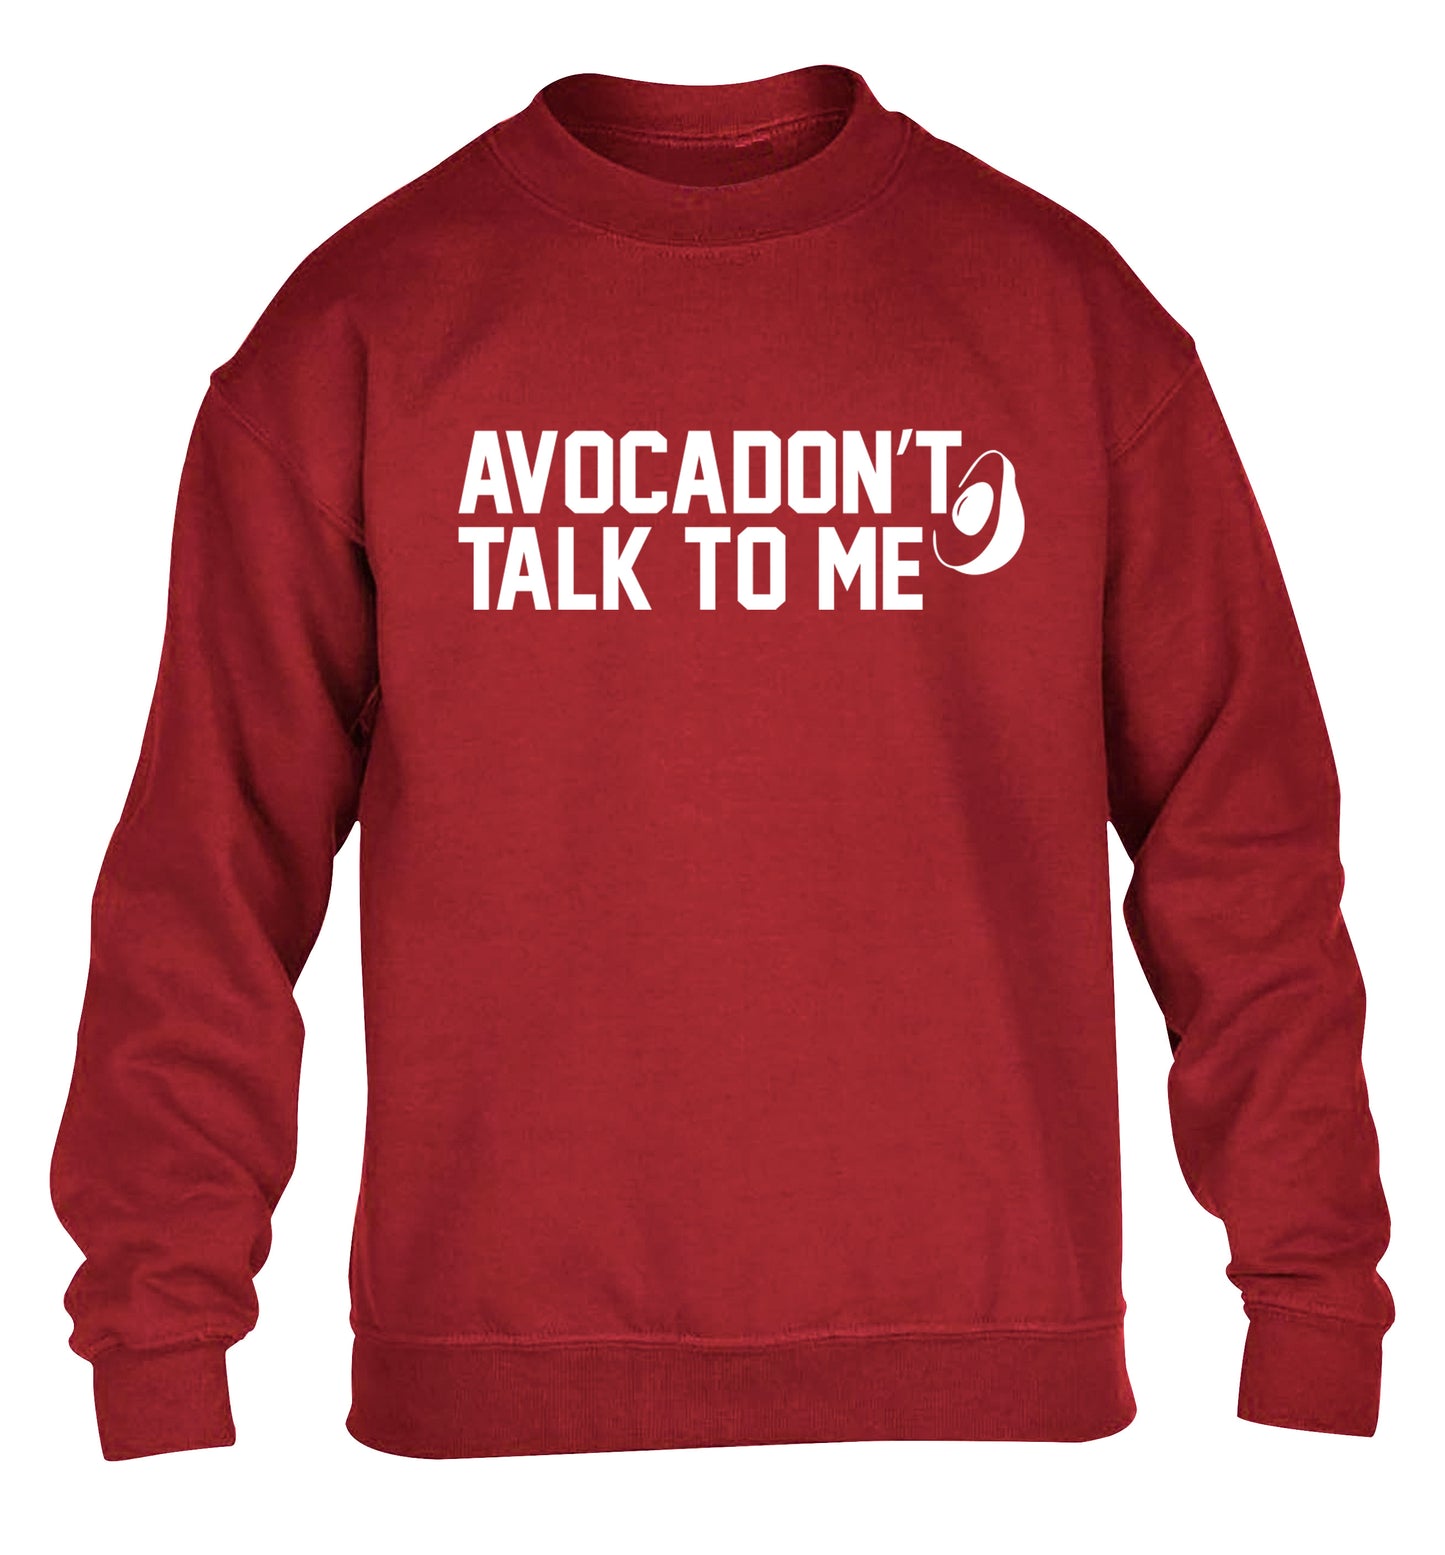 Avocadon't talk to me children's grey sweater 12-14 Years